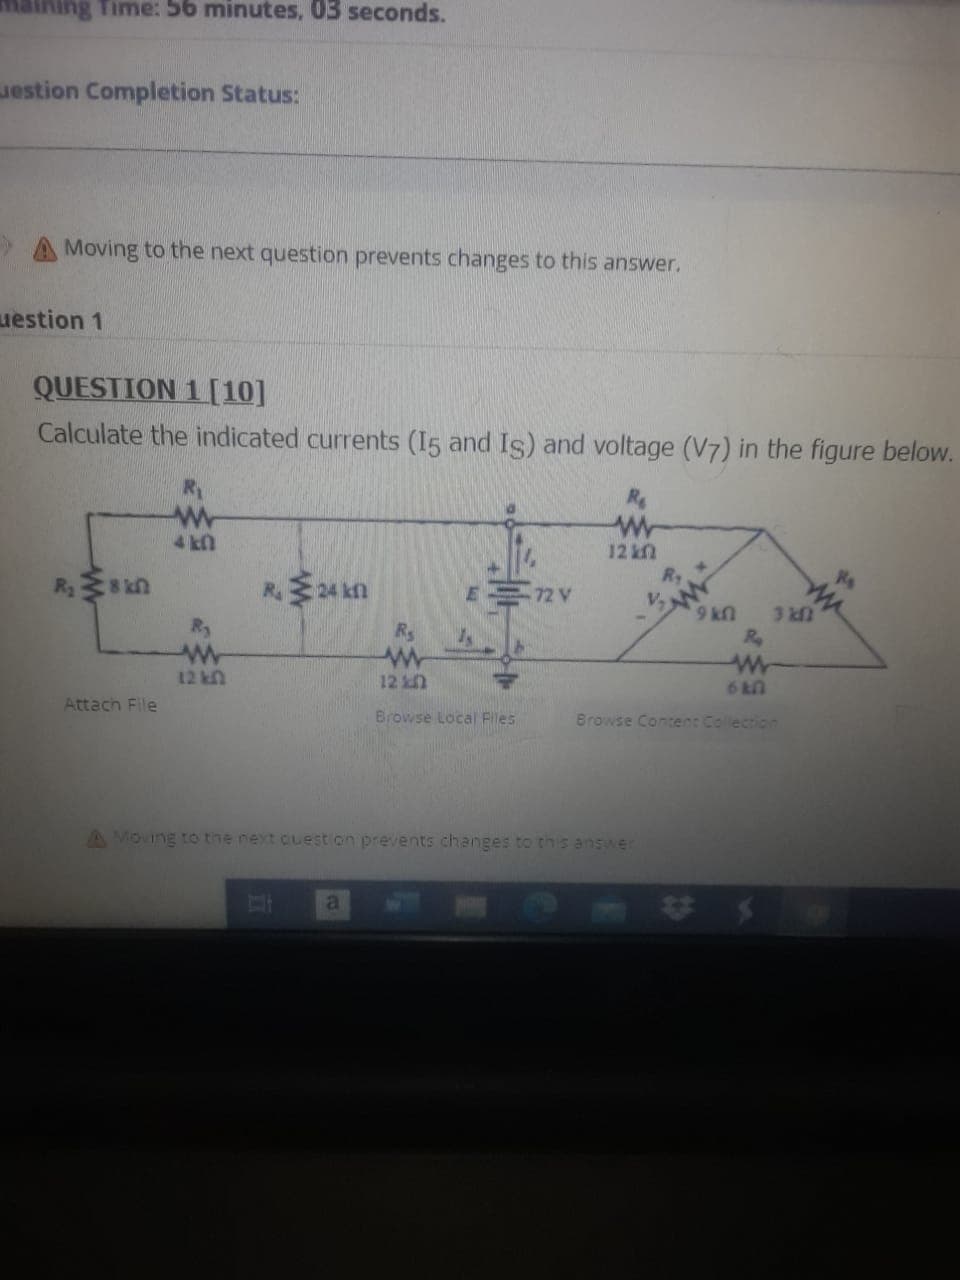 Time: 56 minutes, 03 seconds.
estion Completion Status:
A Moving to the next question prevents changes to this answer.
uestion 1
QUESTION 1 [10]
Calculate the indicated currents (15 and Is) and voltage (V7) in the figure below.
R
4 kn
12 k
Ry
72 V
V,
UN6
3 kn
Ry
Rs
12 k
12
6 T0
Attach File
Browse Local Files
Browse Content Collection
A Moving to the next cuest on prevents changes to thnis answer
al
